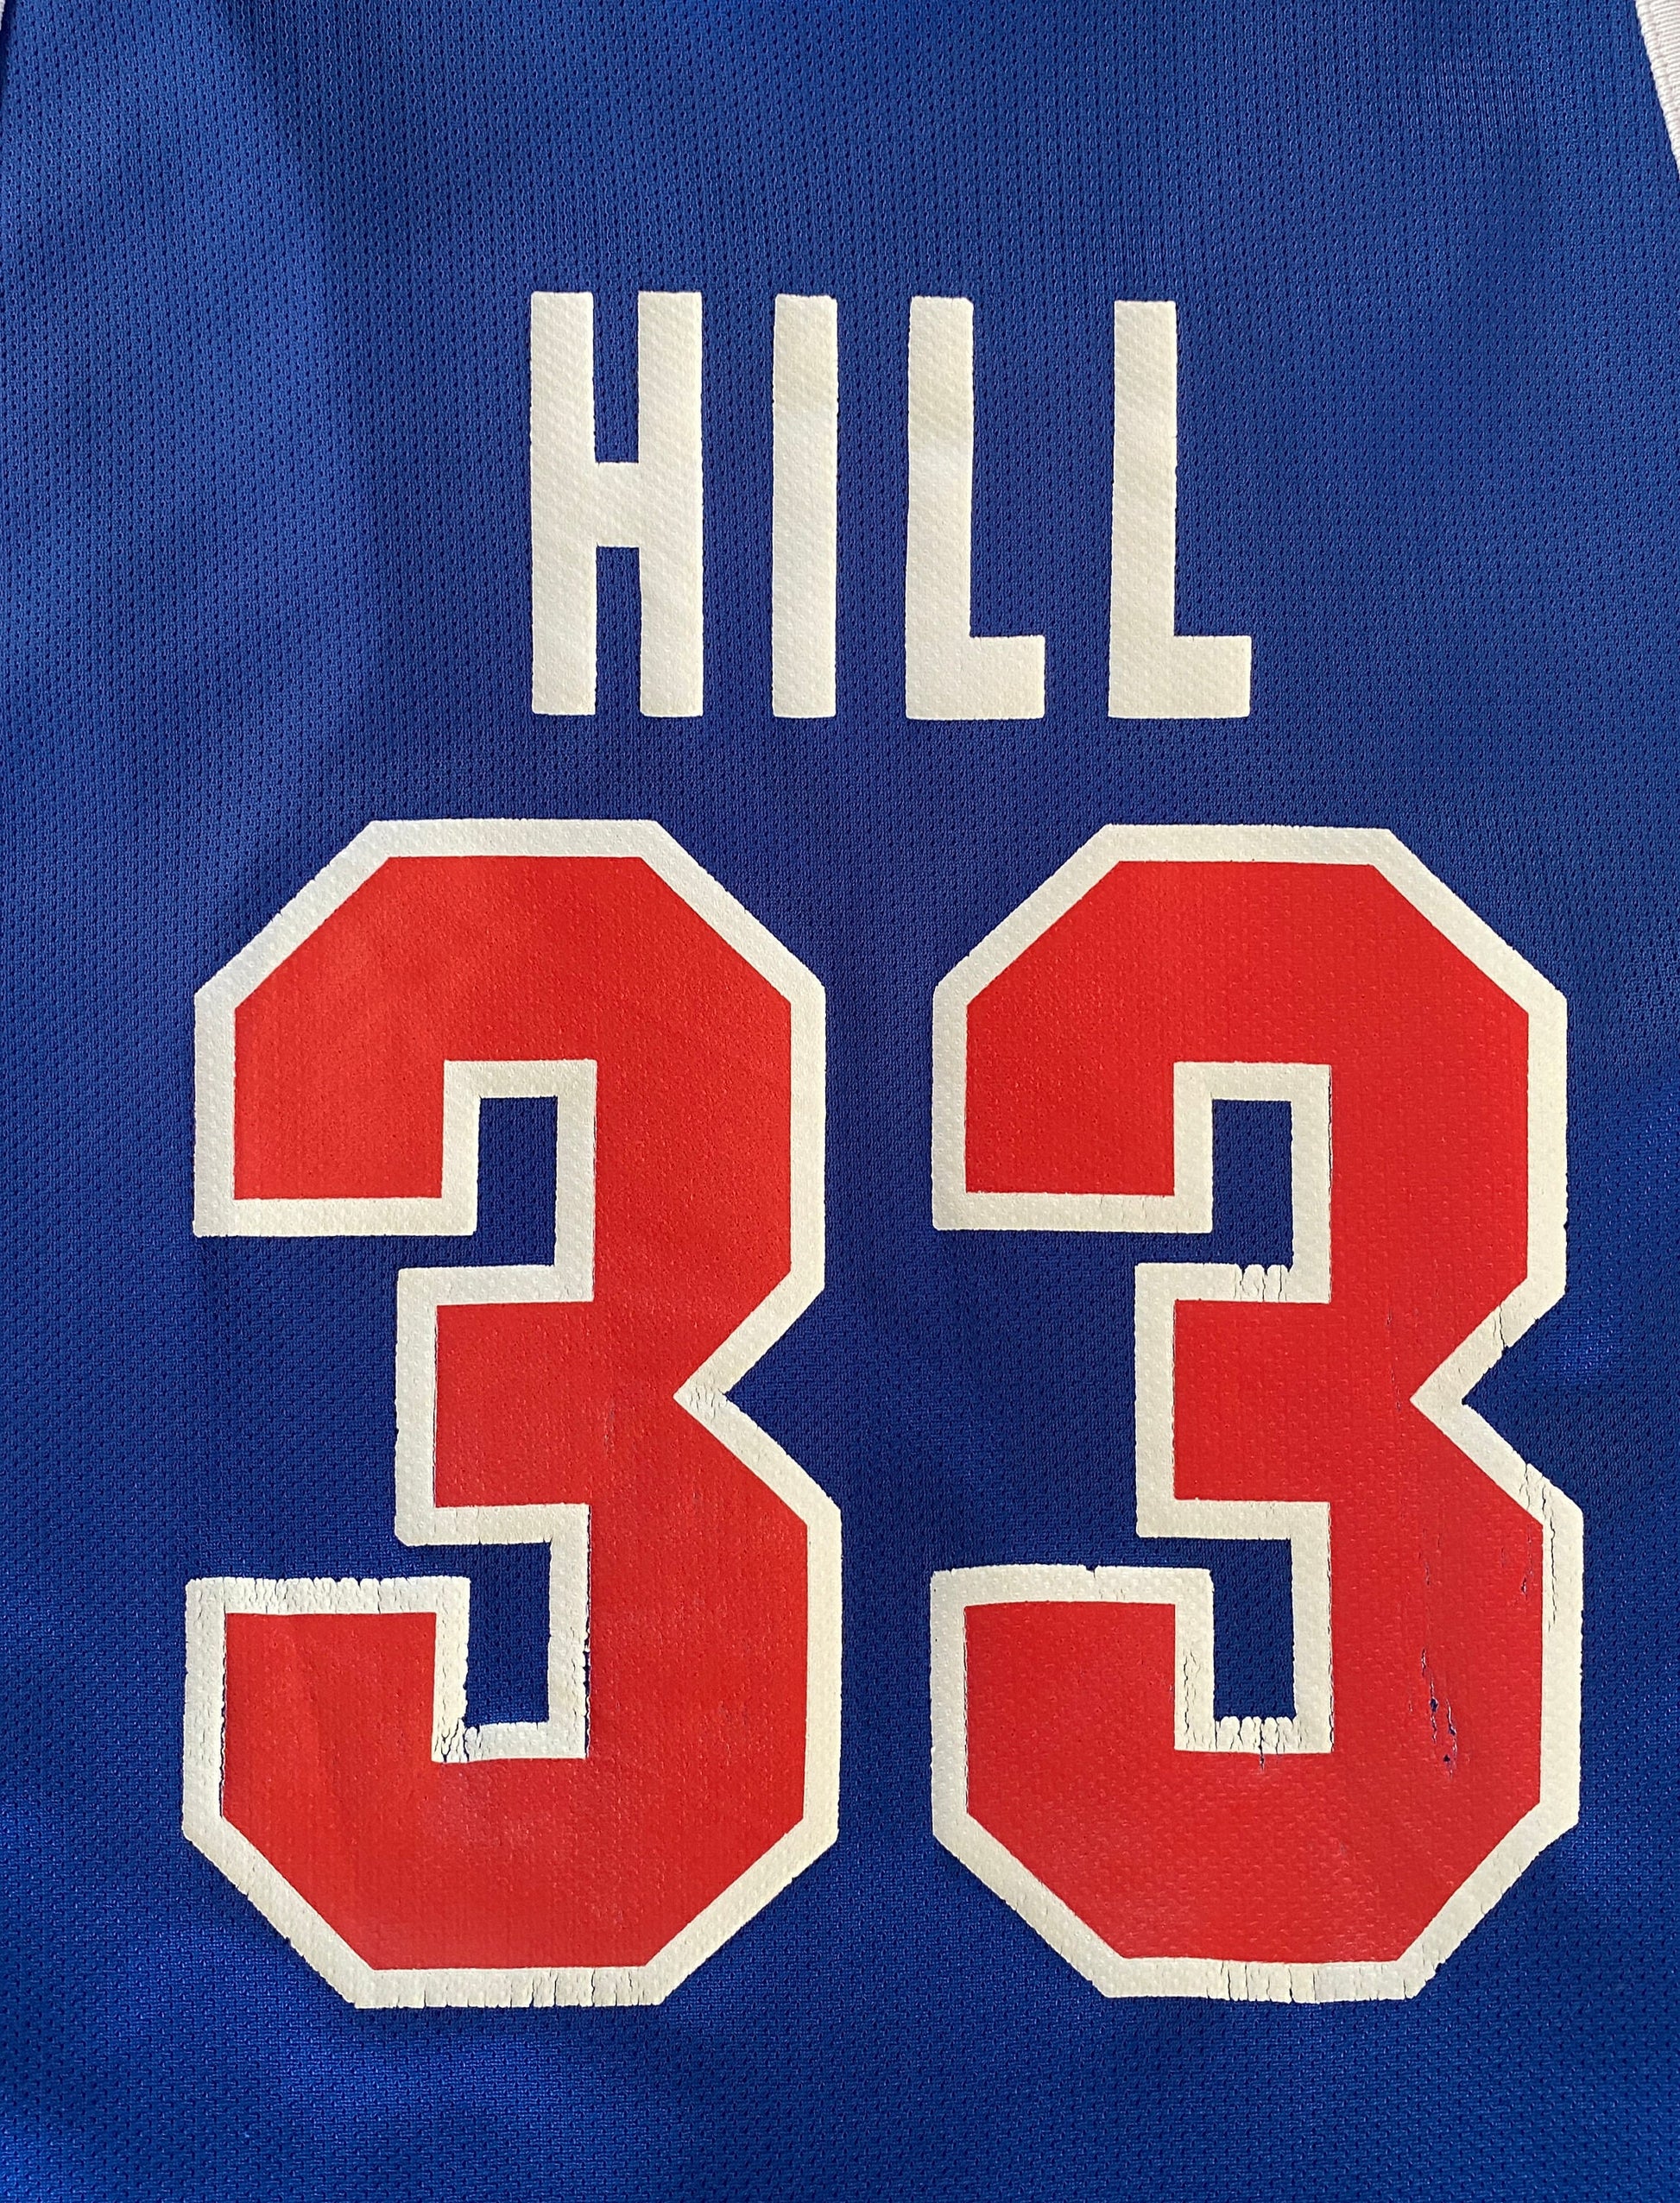 Size 48 Grant Hill #33 Pistons 90s Champion NBA Jersey - back View